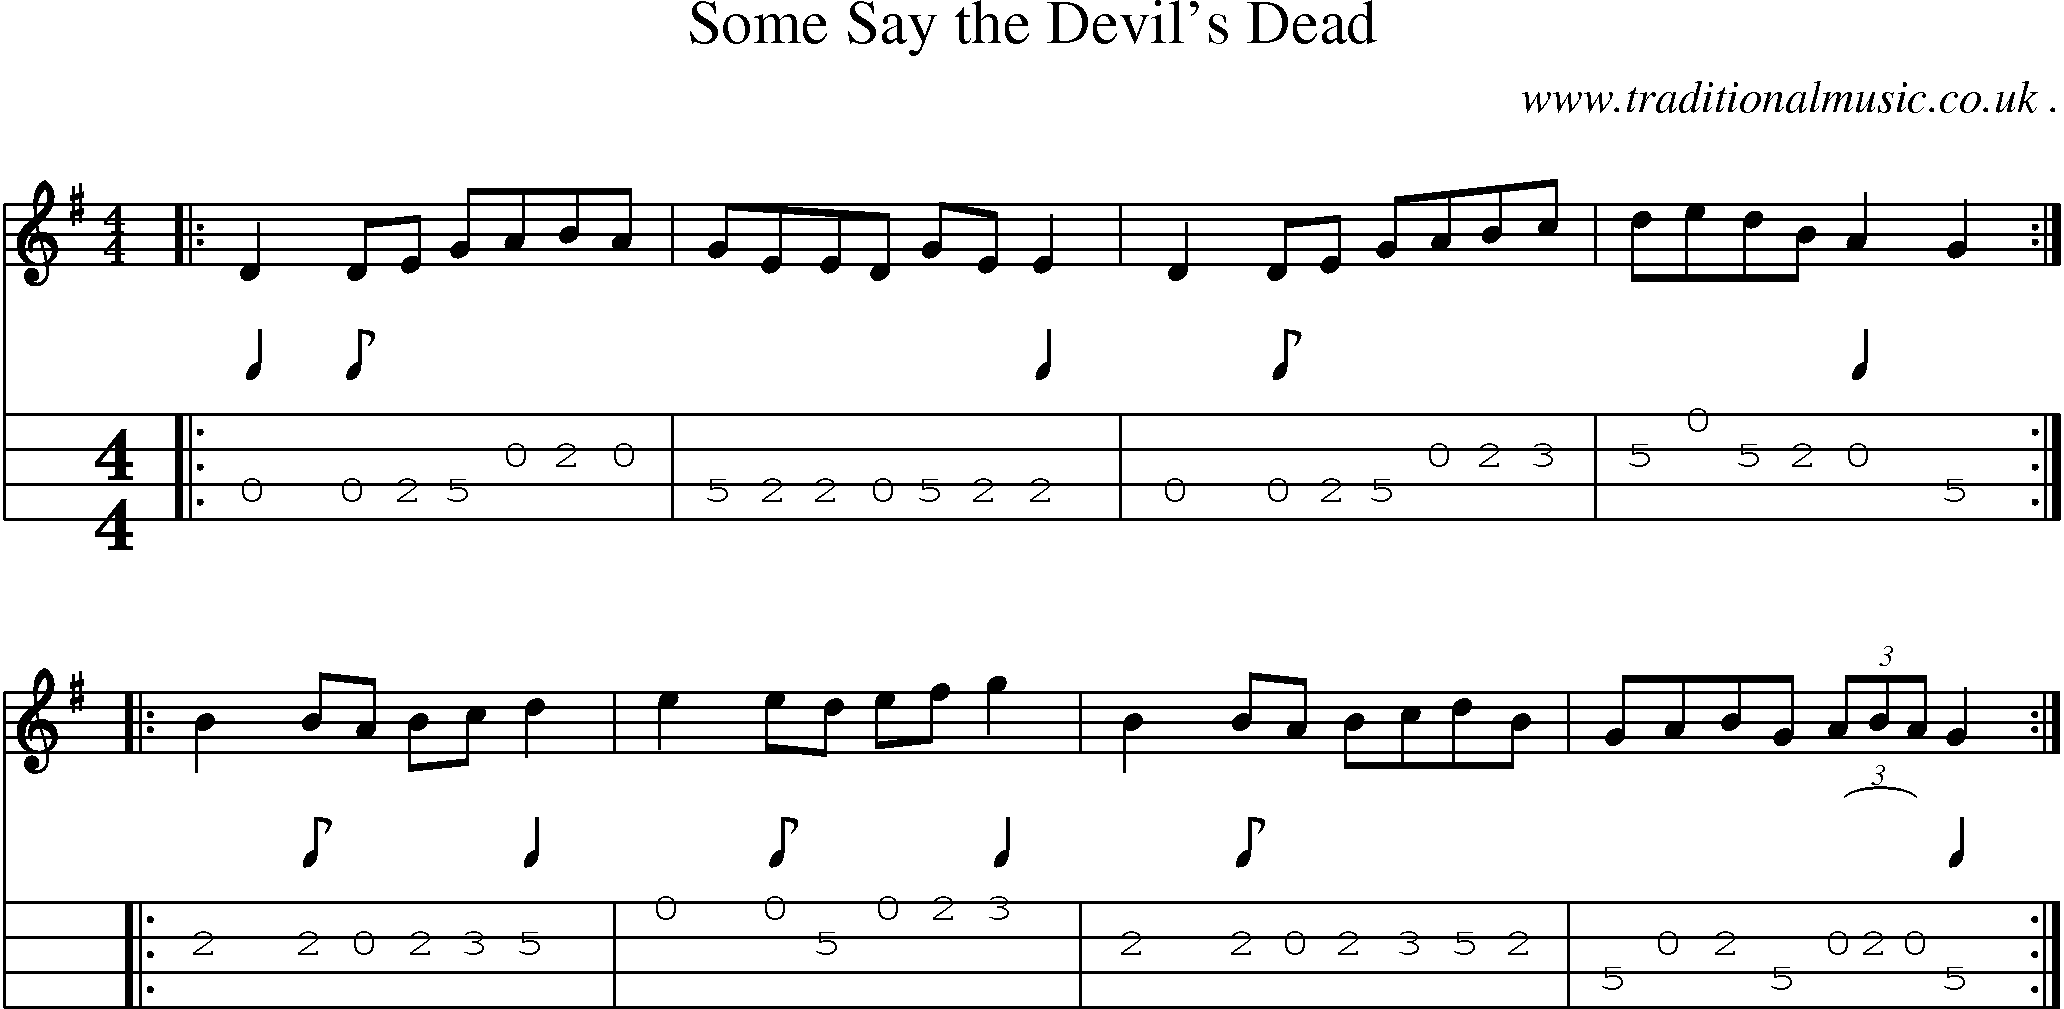 Sheet-music  score, Chords and Mandolin Tabs for Some Say The Devils Dead